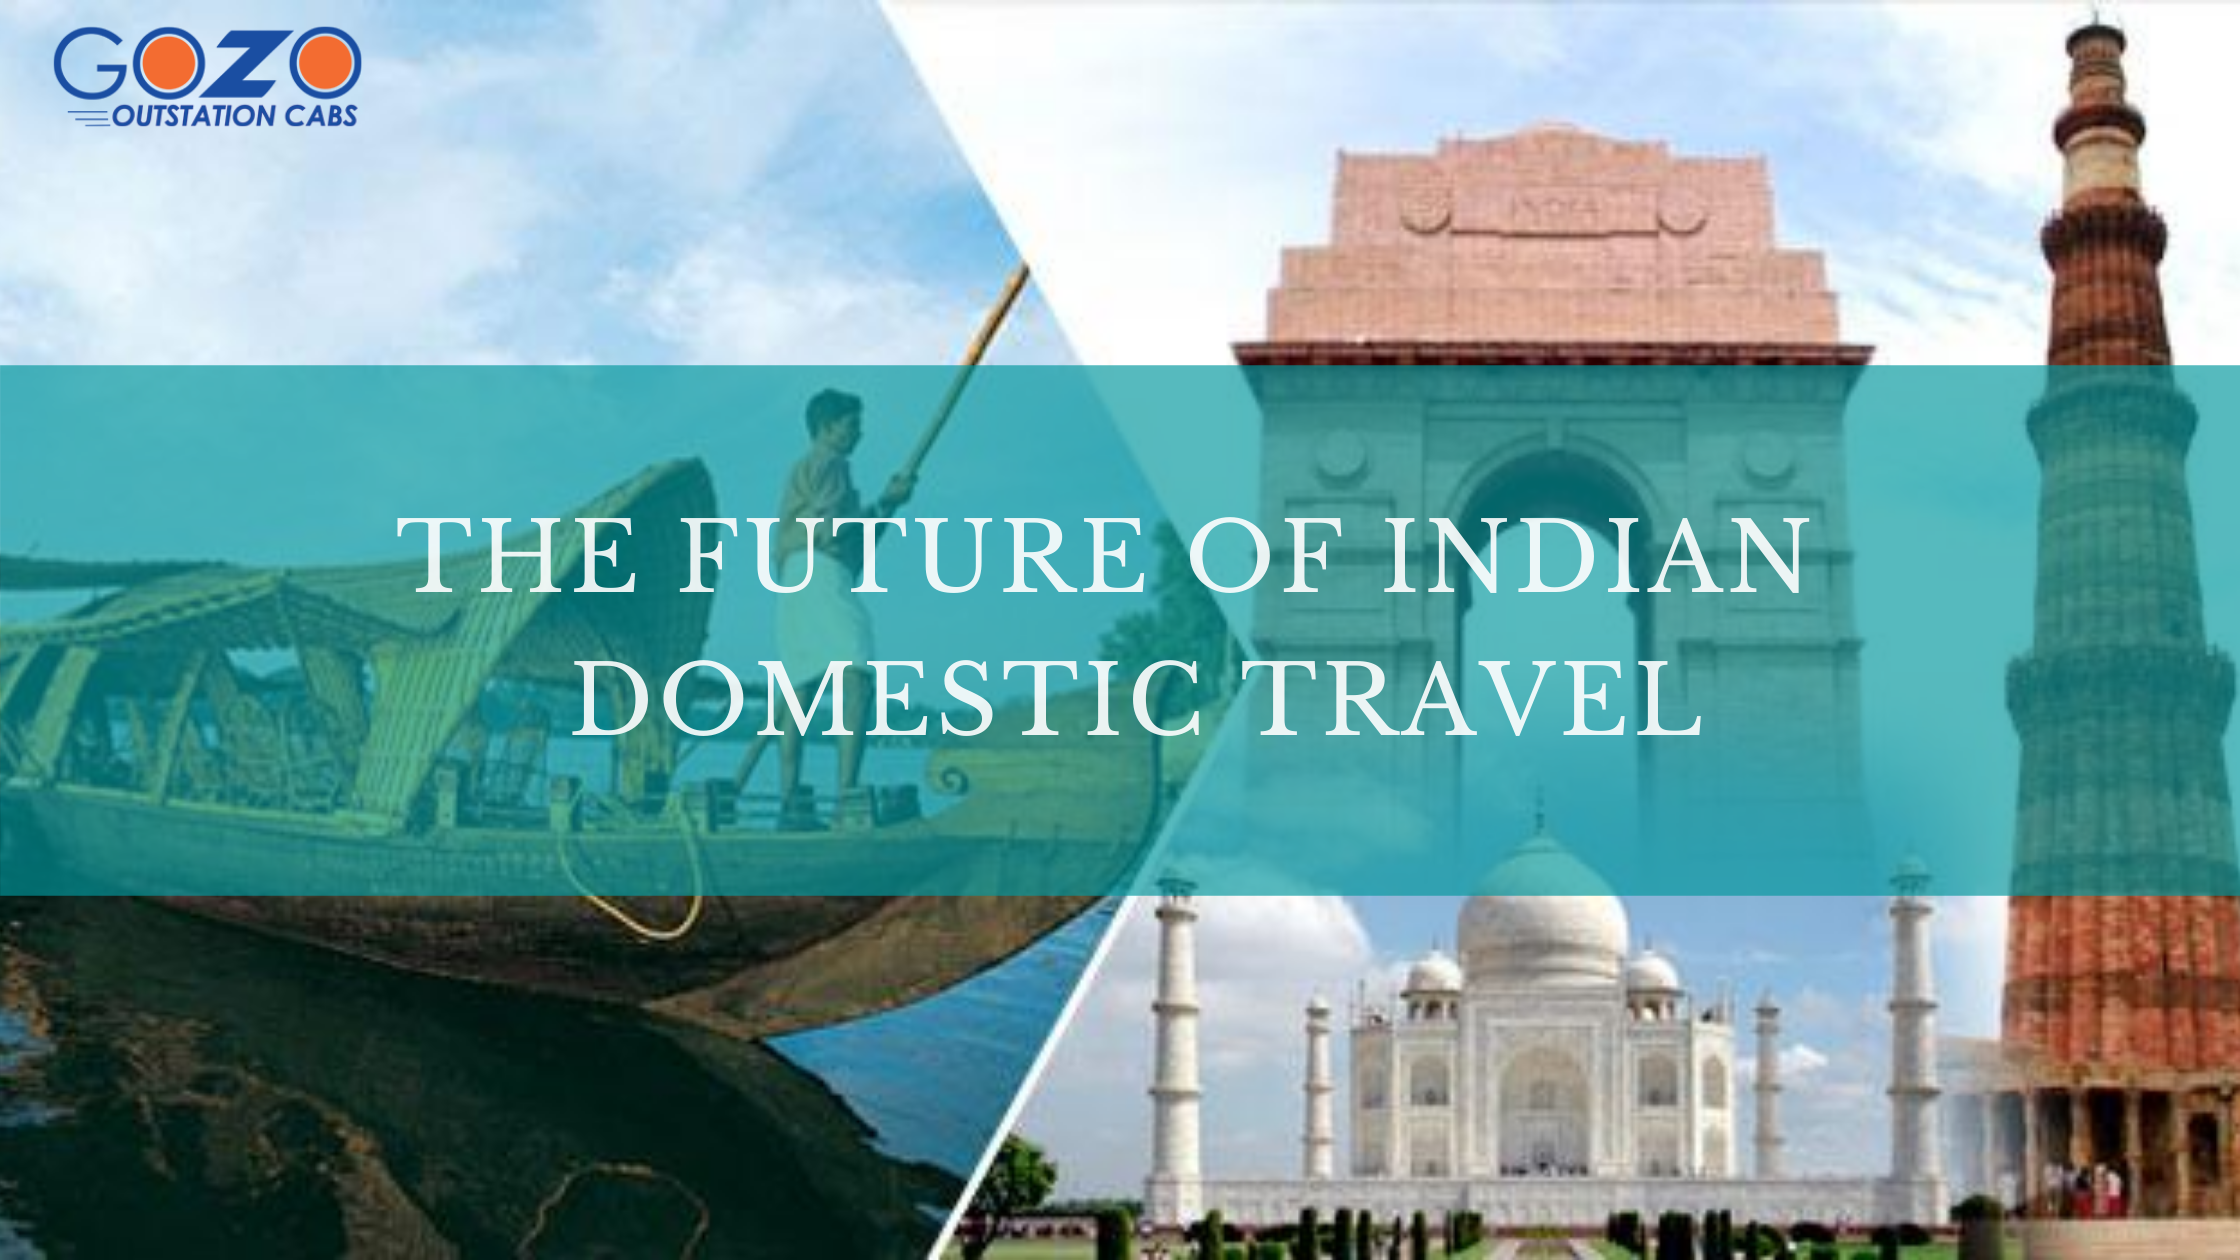 The Future of Indian Domestic Travel by GozoCabs